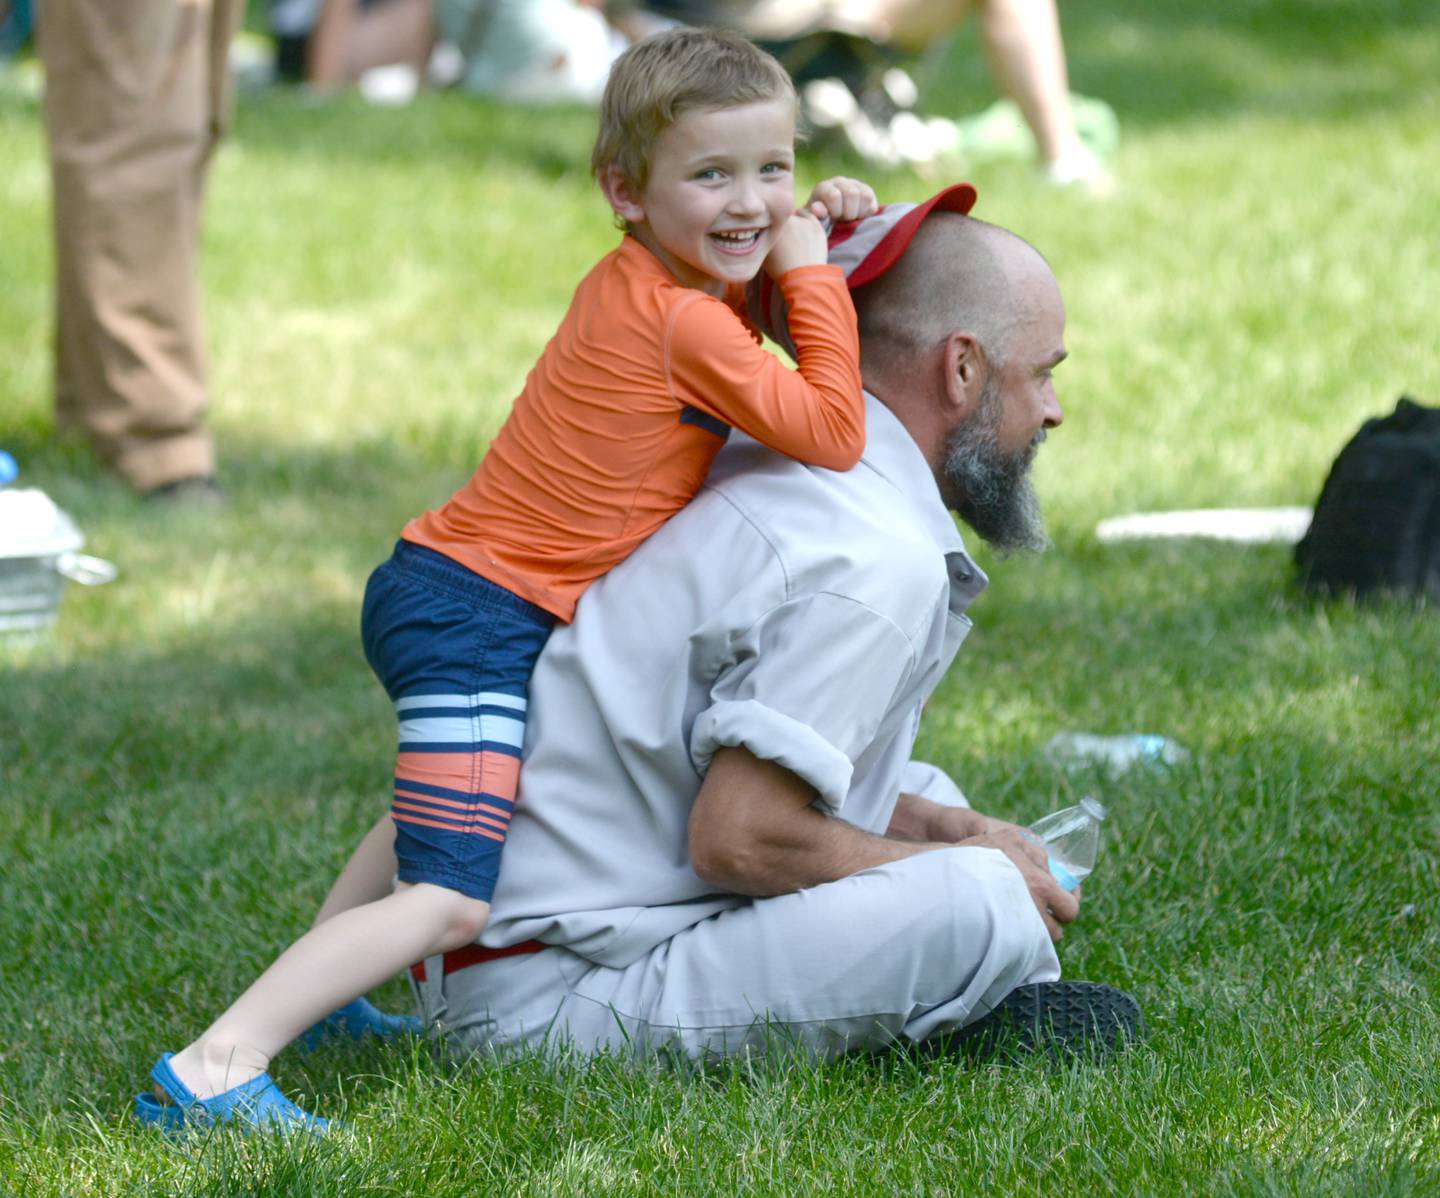 Noah Rogers, 6, of Oregon teases Oregon Ganymede player Mike "T-Bag" Thomas as they watch the Ganymedes' vintage base ball game with the DuPage Plowboys on Saturday, June 3 at the John Deere Historic Site in Grand Detour. Rogers dad is also on the Ganymede team.